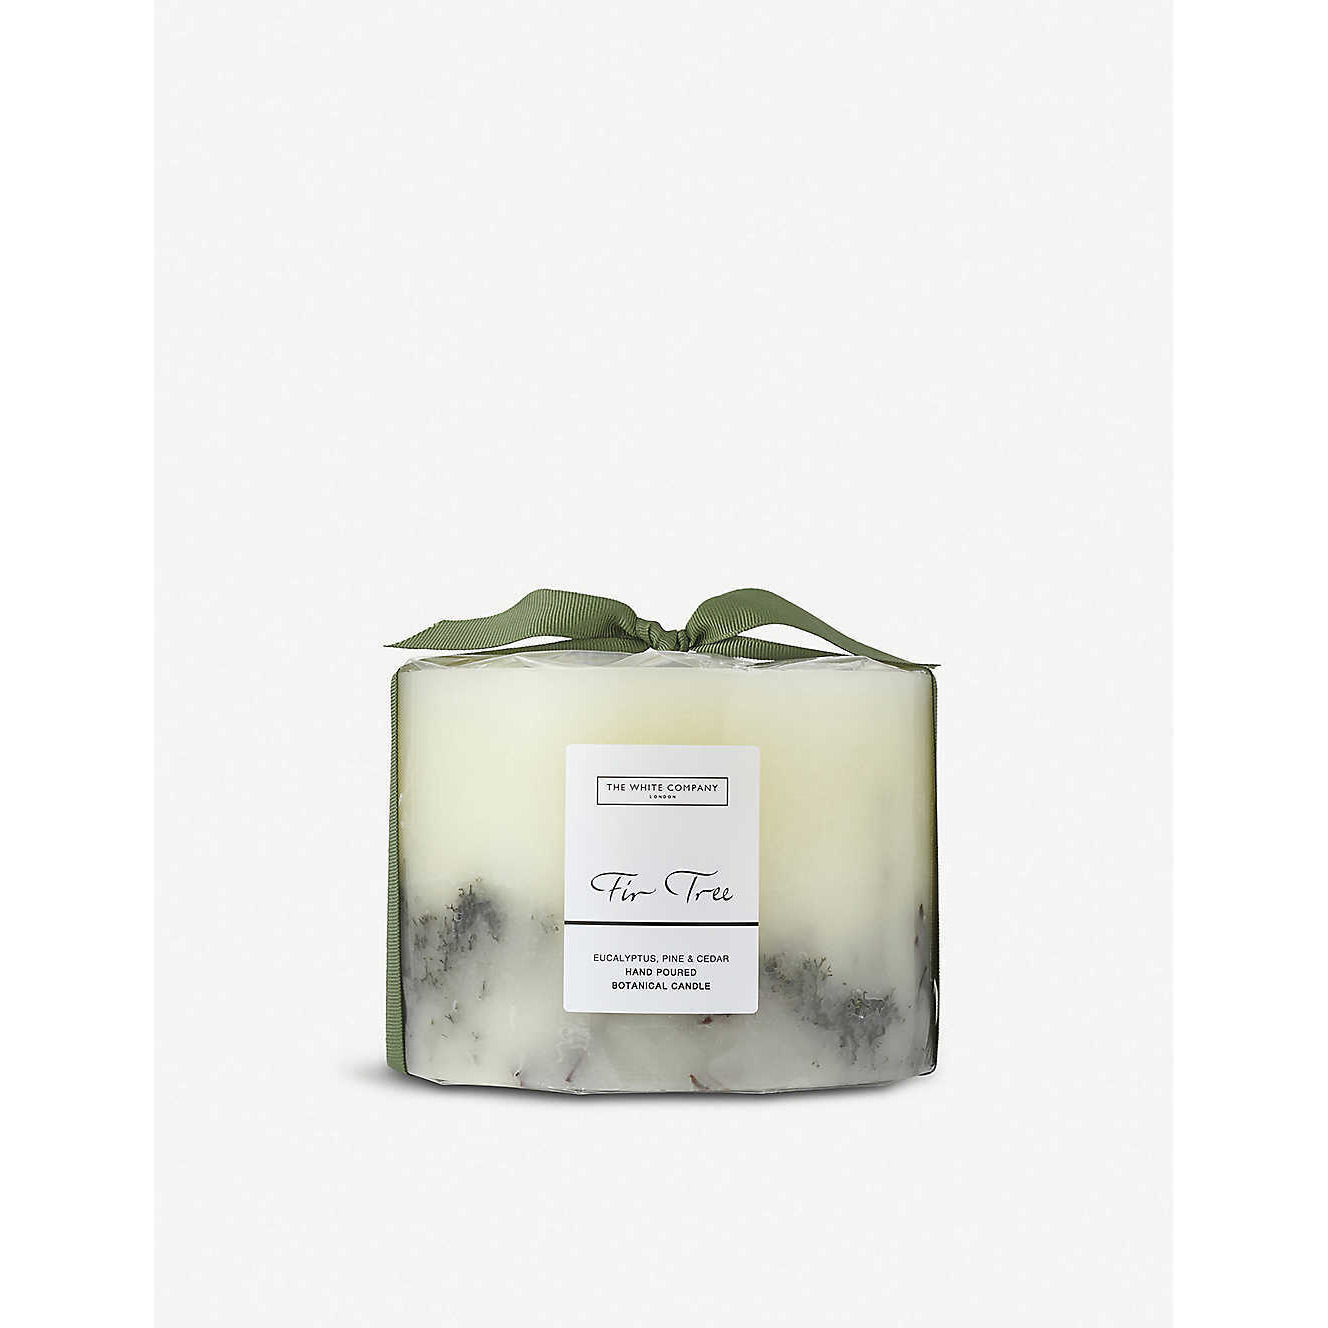 Fir Tree botanical large scented candle 1555g - image 1